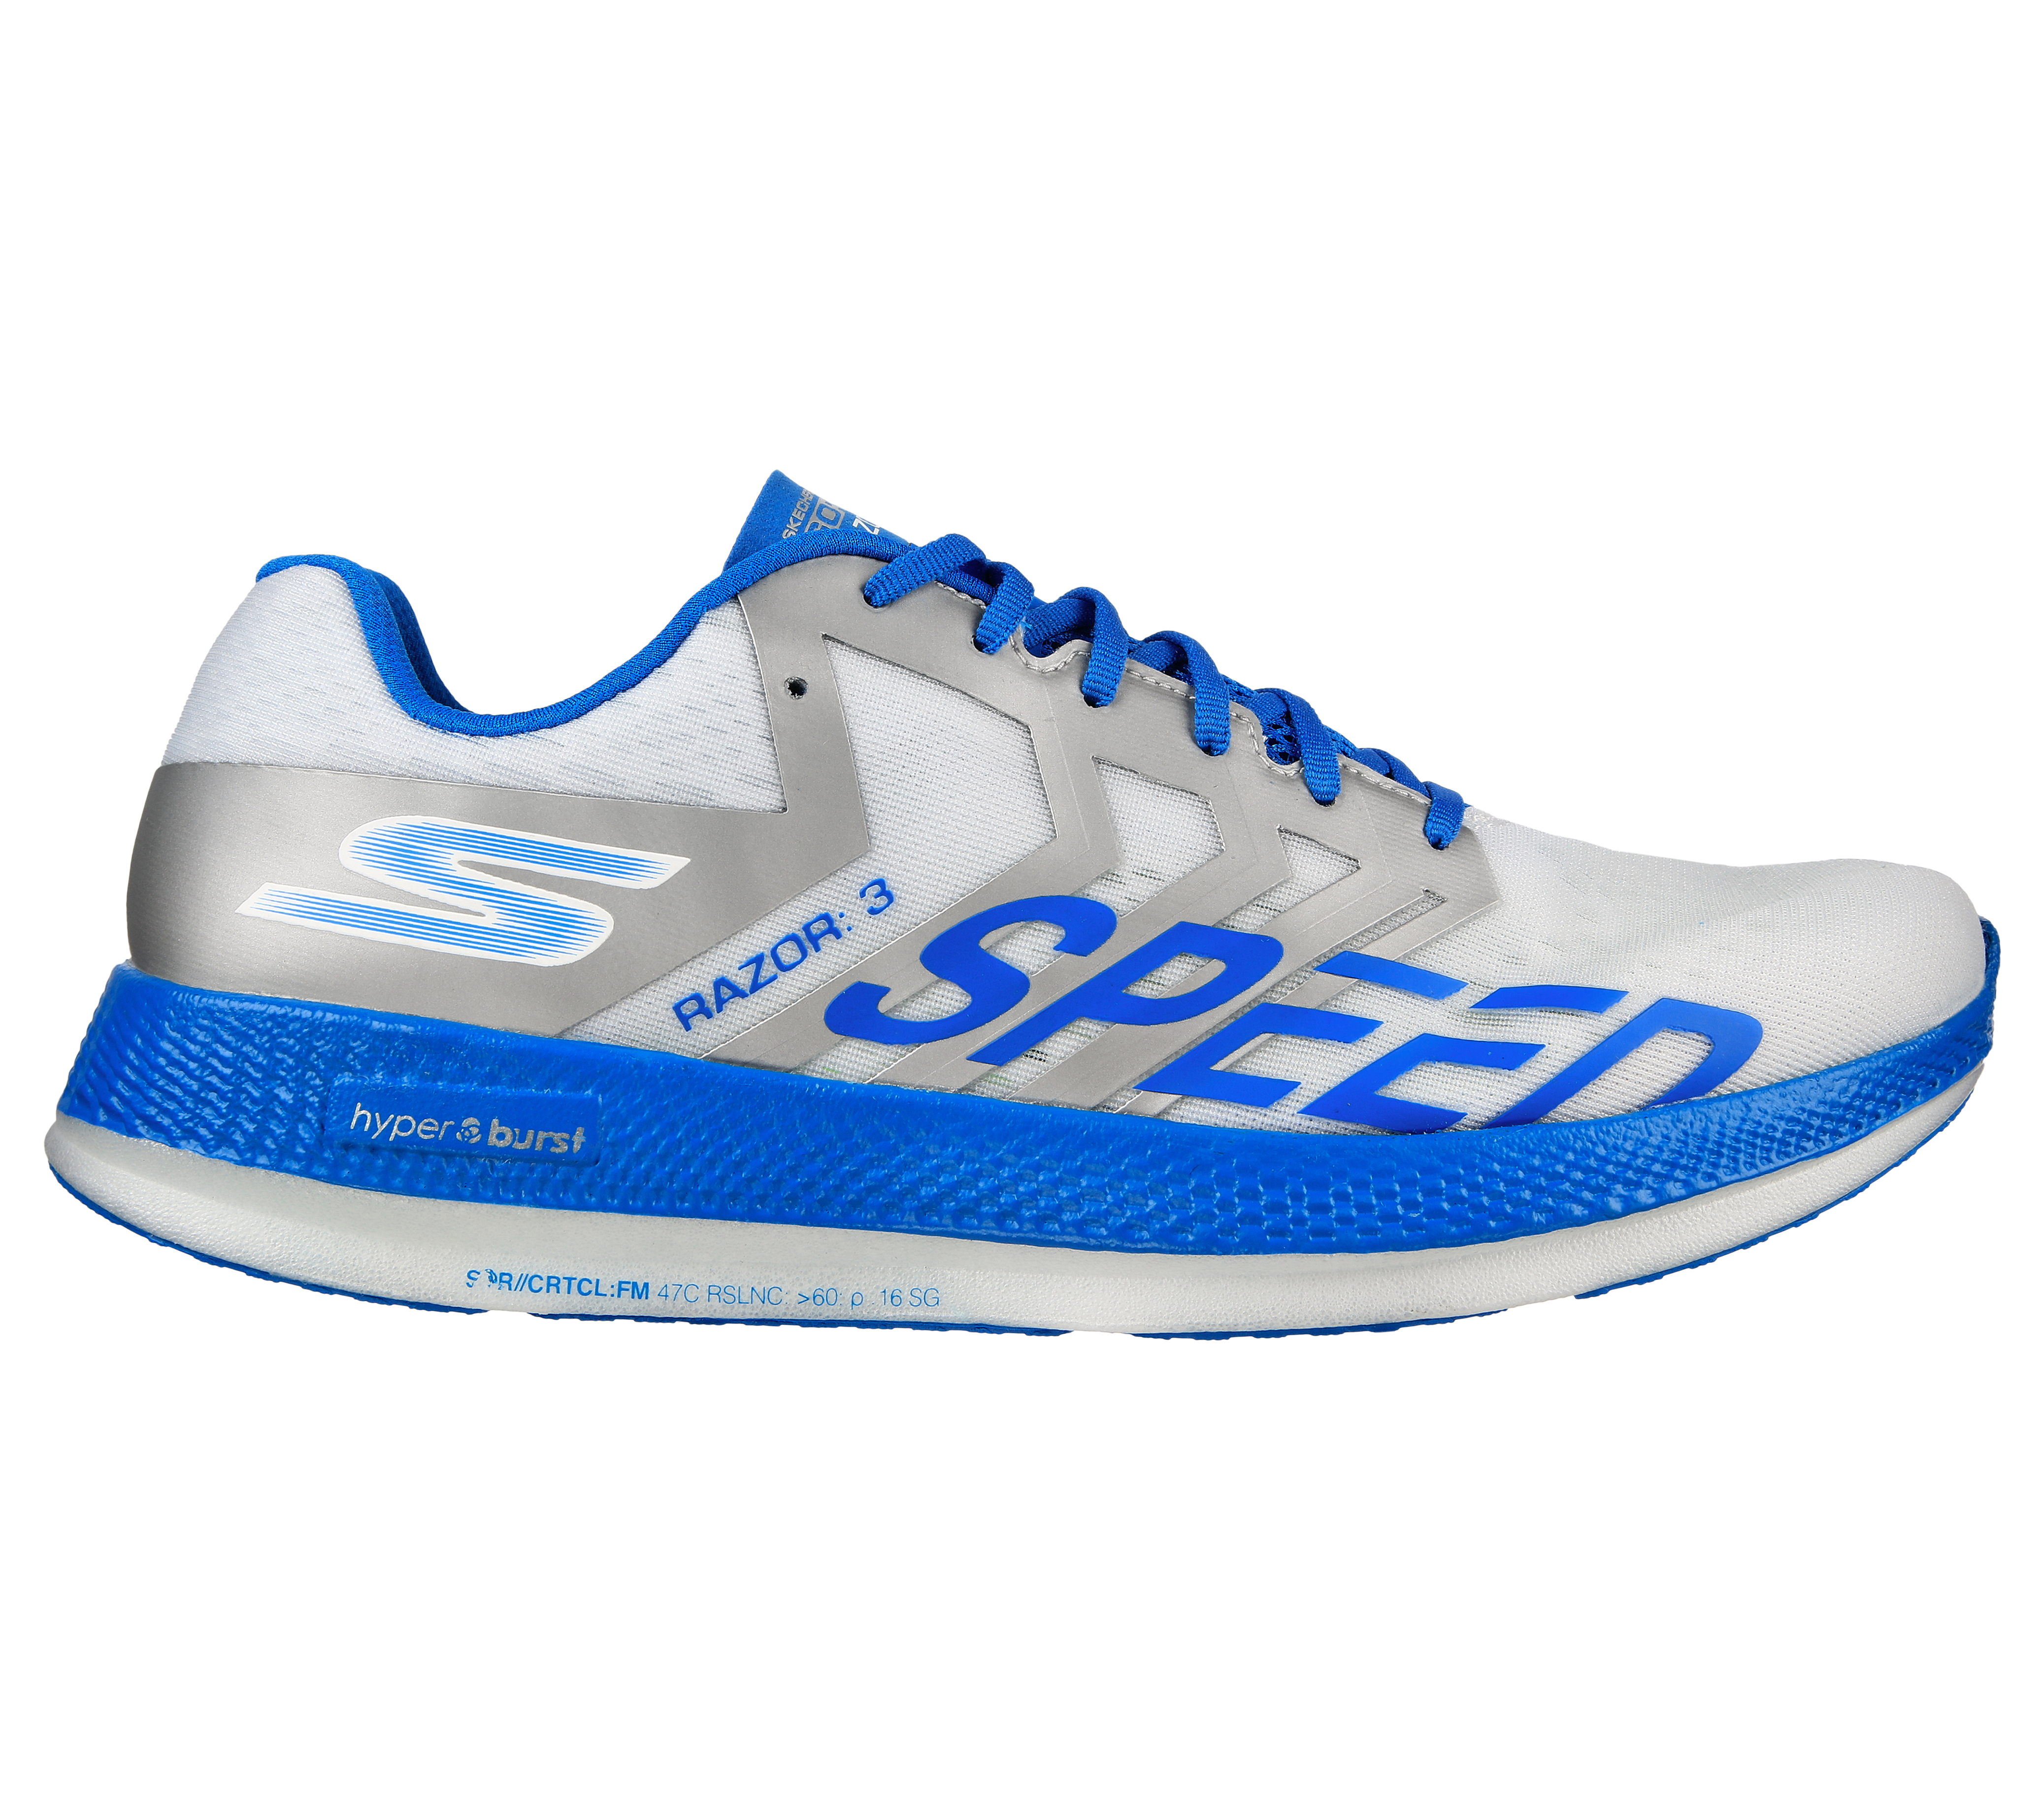 skechers shoes singapore price Off 62 